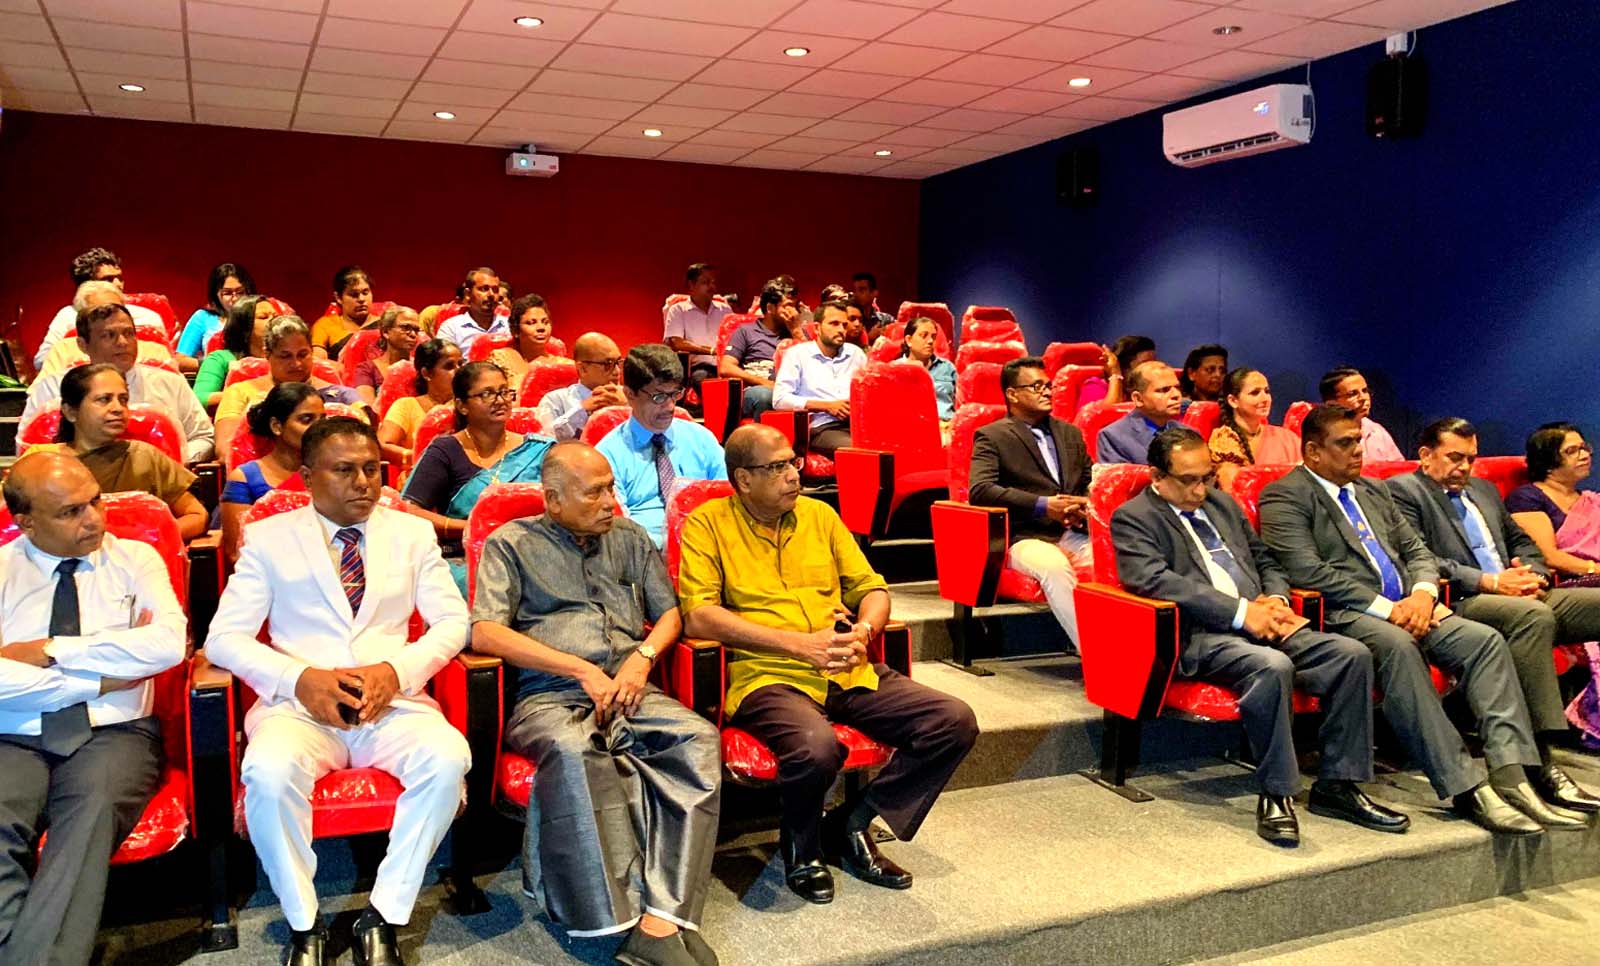 Grand Opening of 5.1 dts Cinema Mini Theater at the Sri Palee Campus, University of Colombo